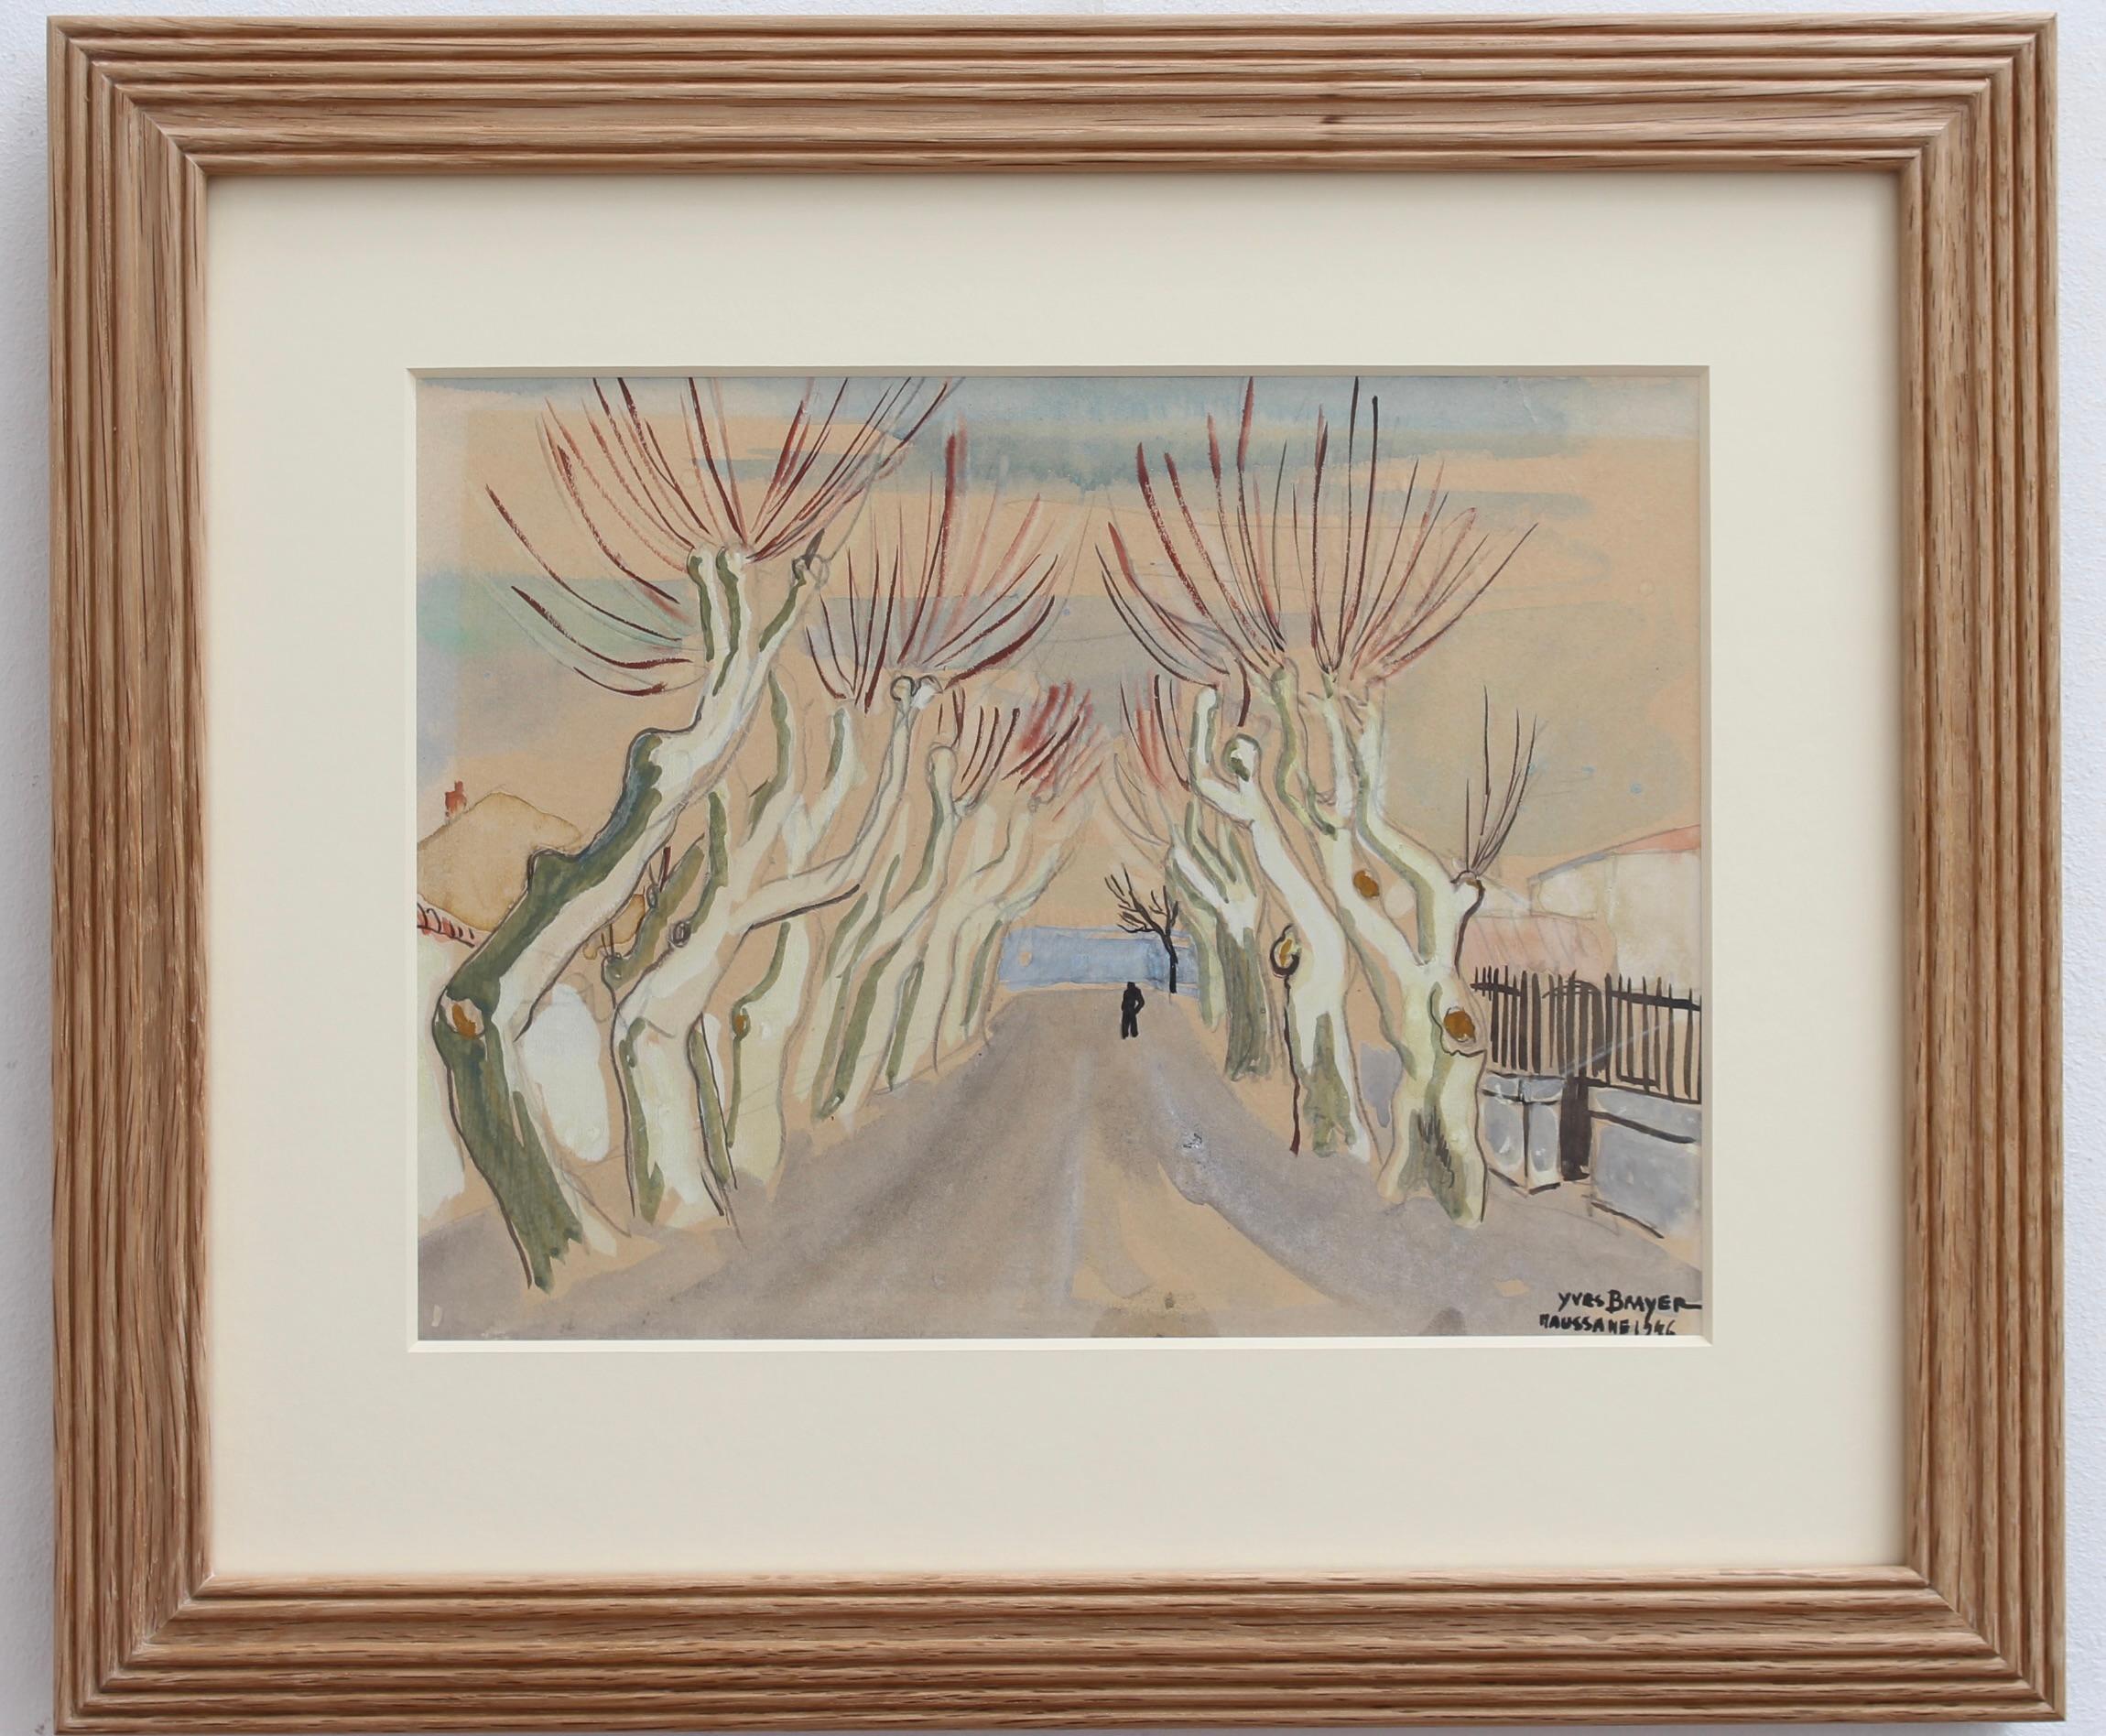 Yves Brayer Landscape Painting - Row of Plane Trees In Winter - Maussane-les-Alpilles